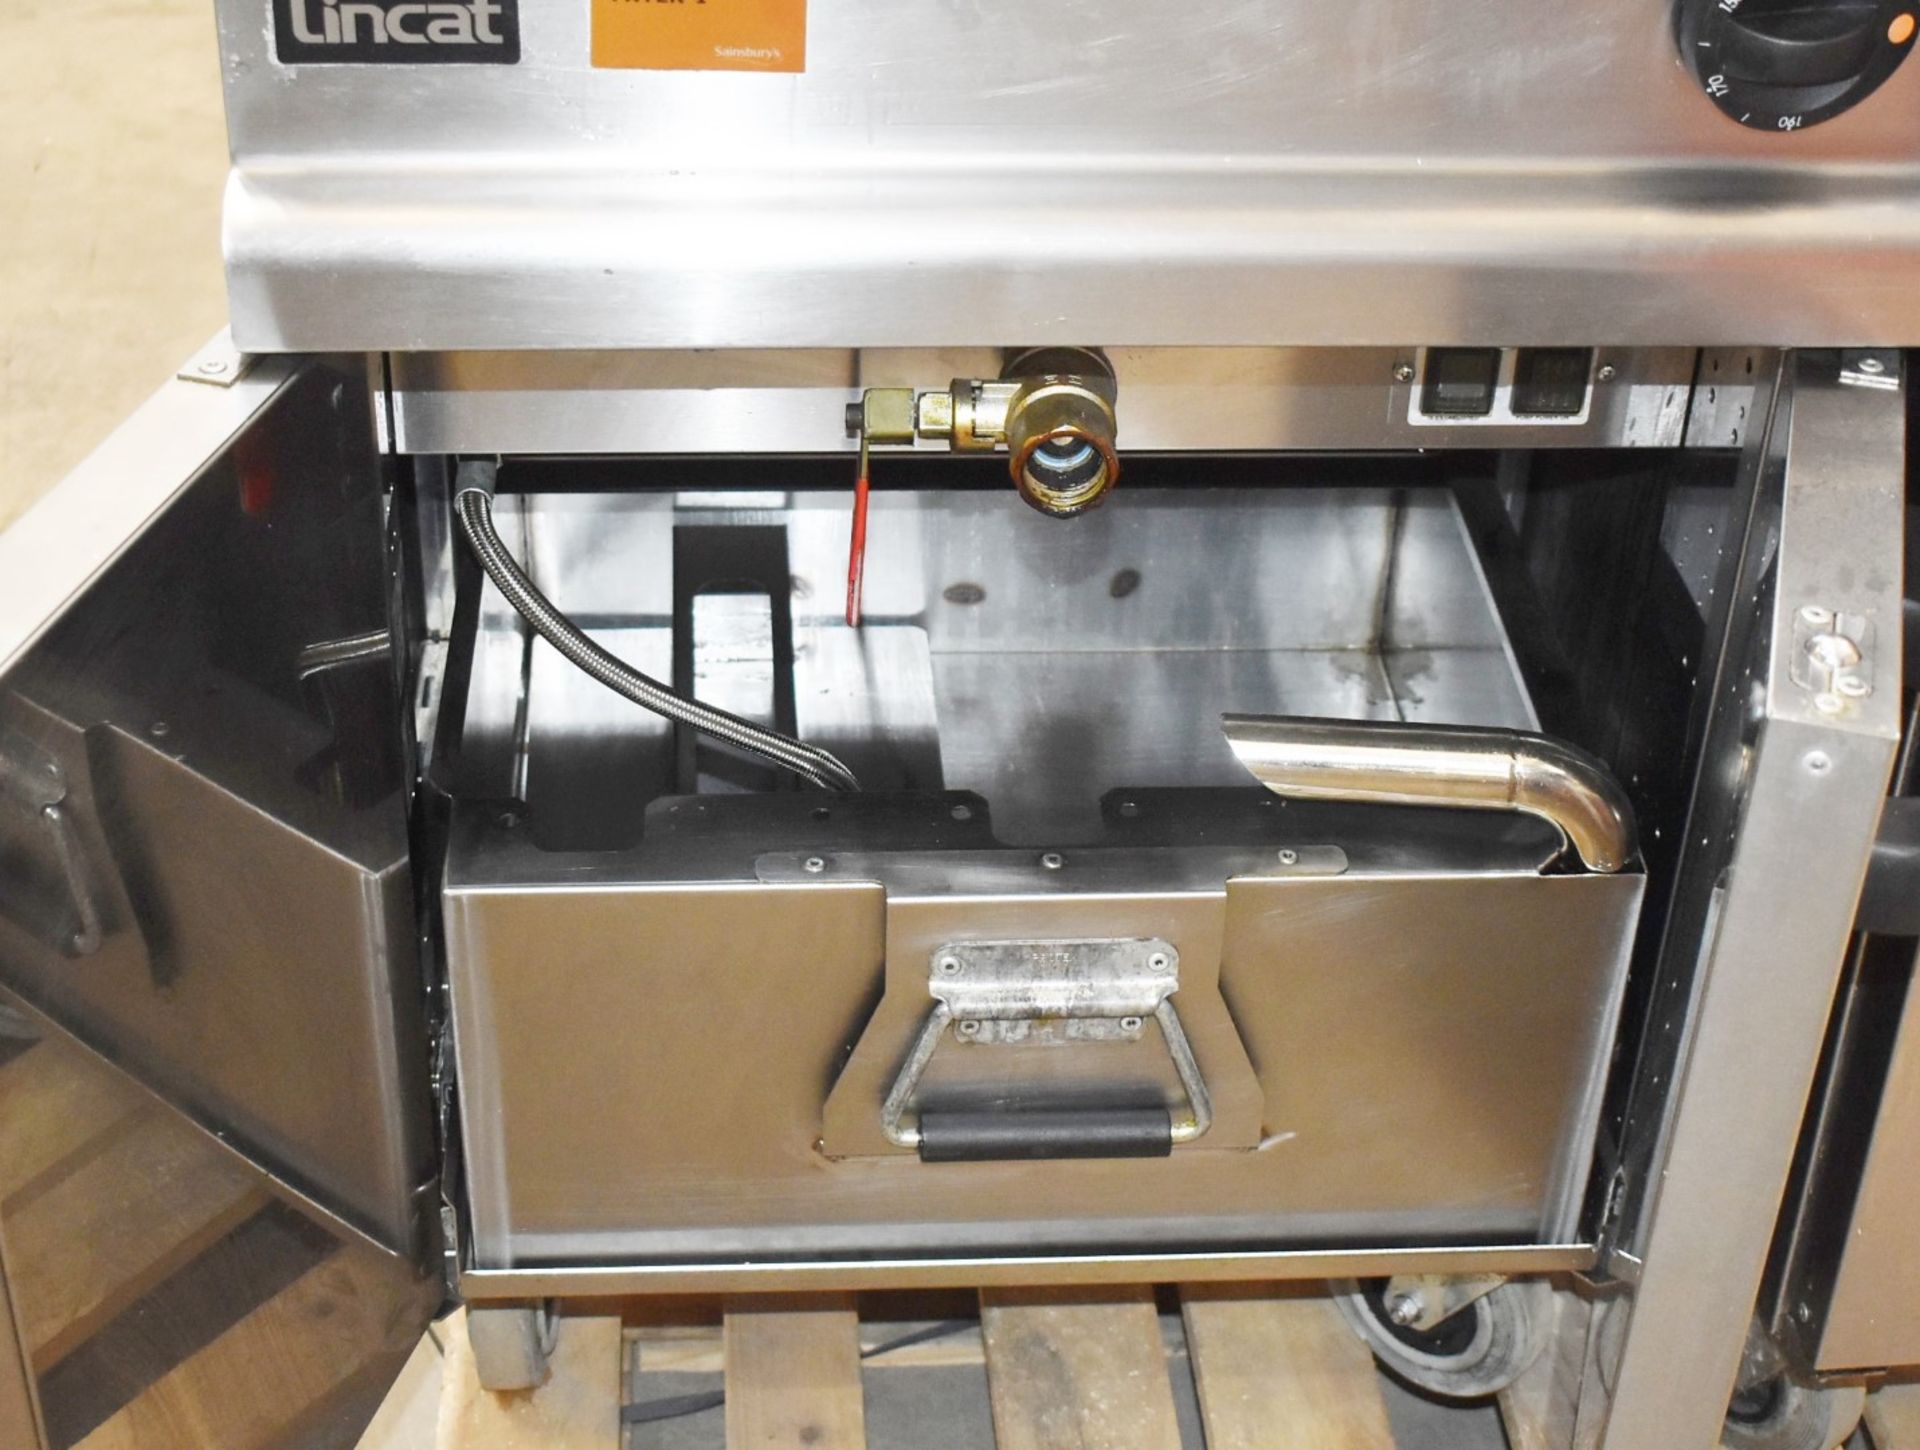 1 x Lincat Opus 700 OE7113 Single Large Tank Electric Fryer With Built In Filteration - 240V / 3PH P - Image 5 of 8